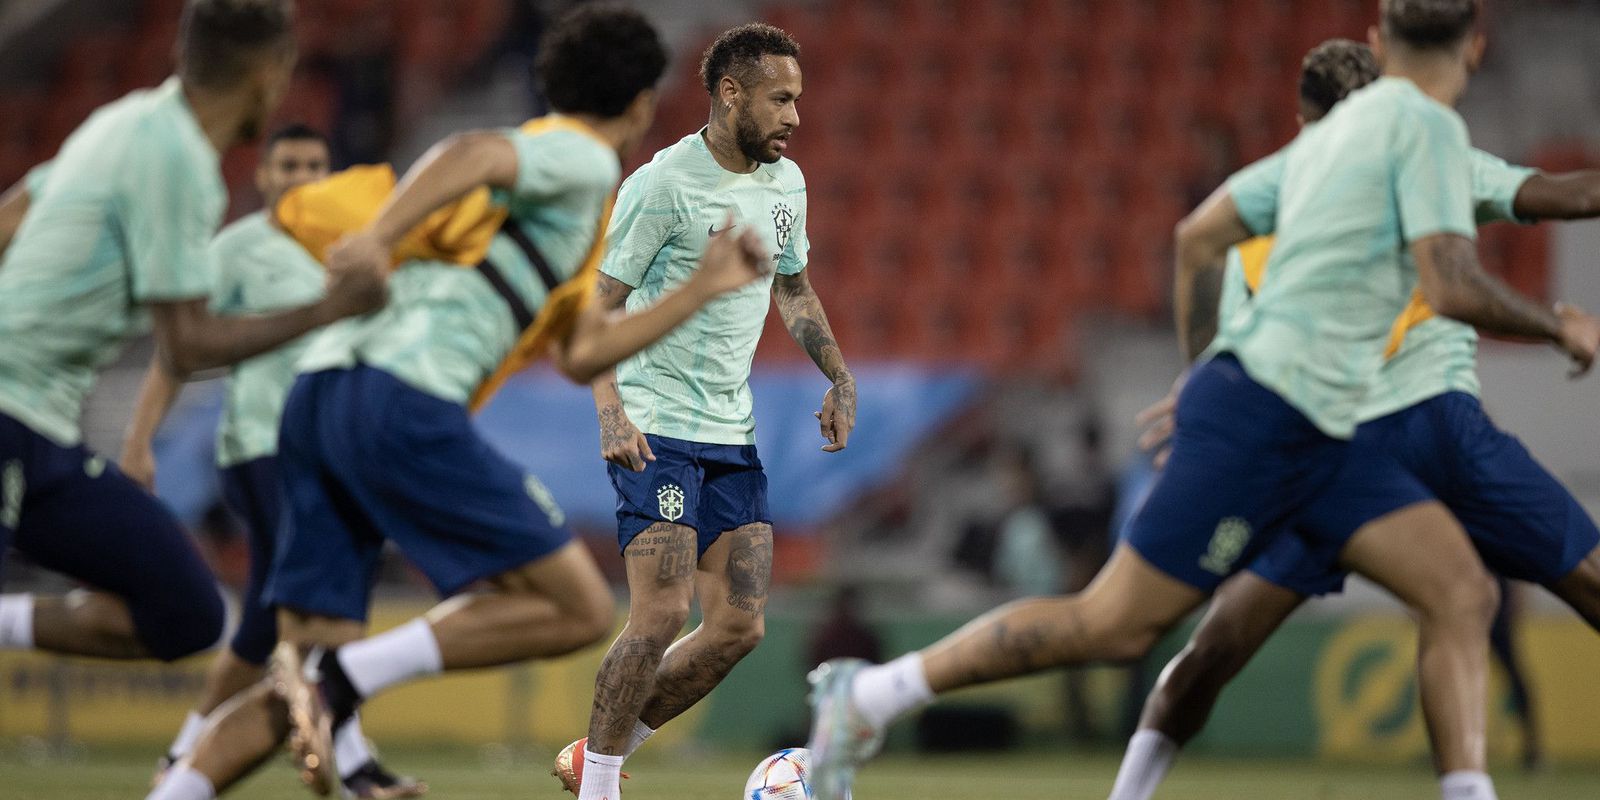 With Neymar recovered, Brazil faces South Korea for the round of 16